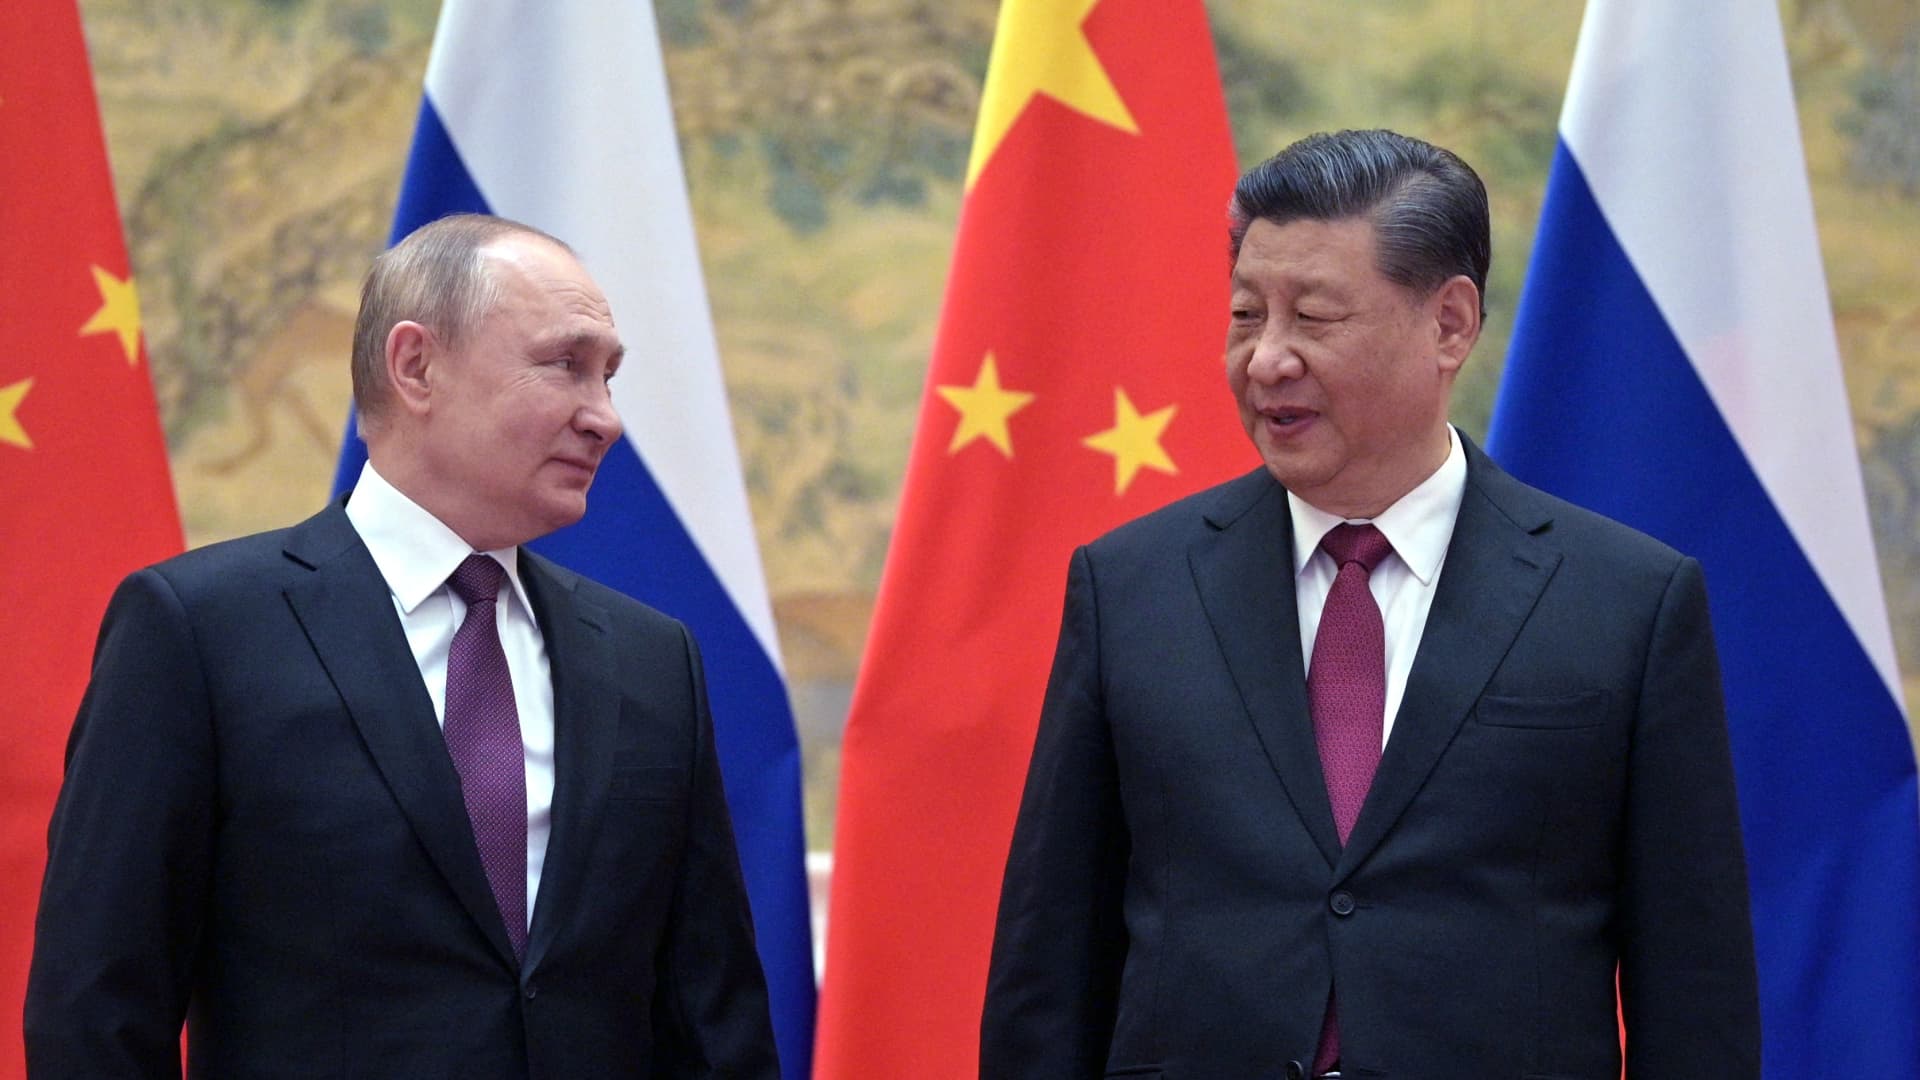 Russia may aspire to a China-style internet, but it’s a long way off